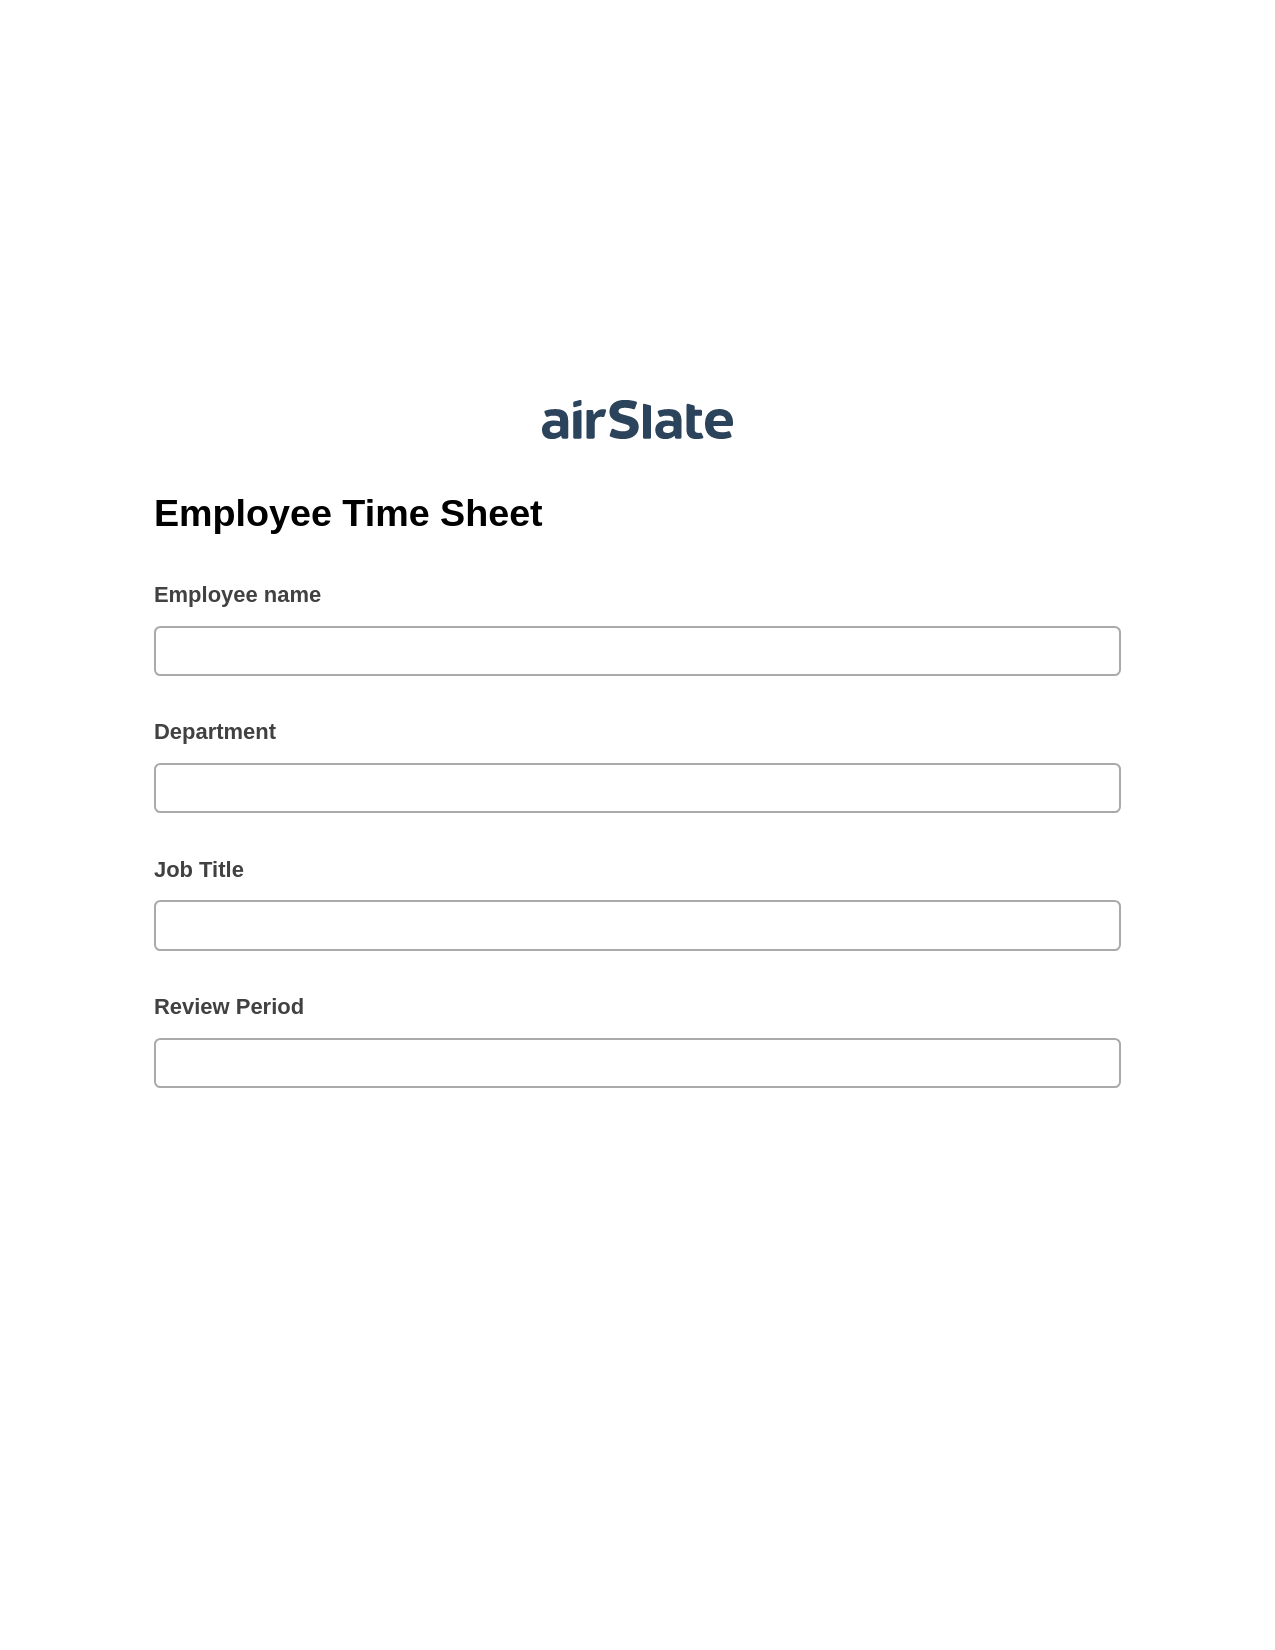 Employee Time Sheet Pre-fill Document Bot, Custom Field's Value Bot, Export to Salesforce Record Bot